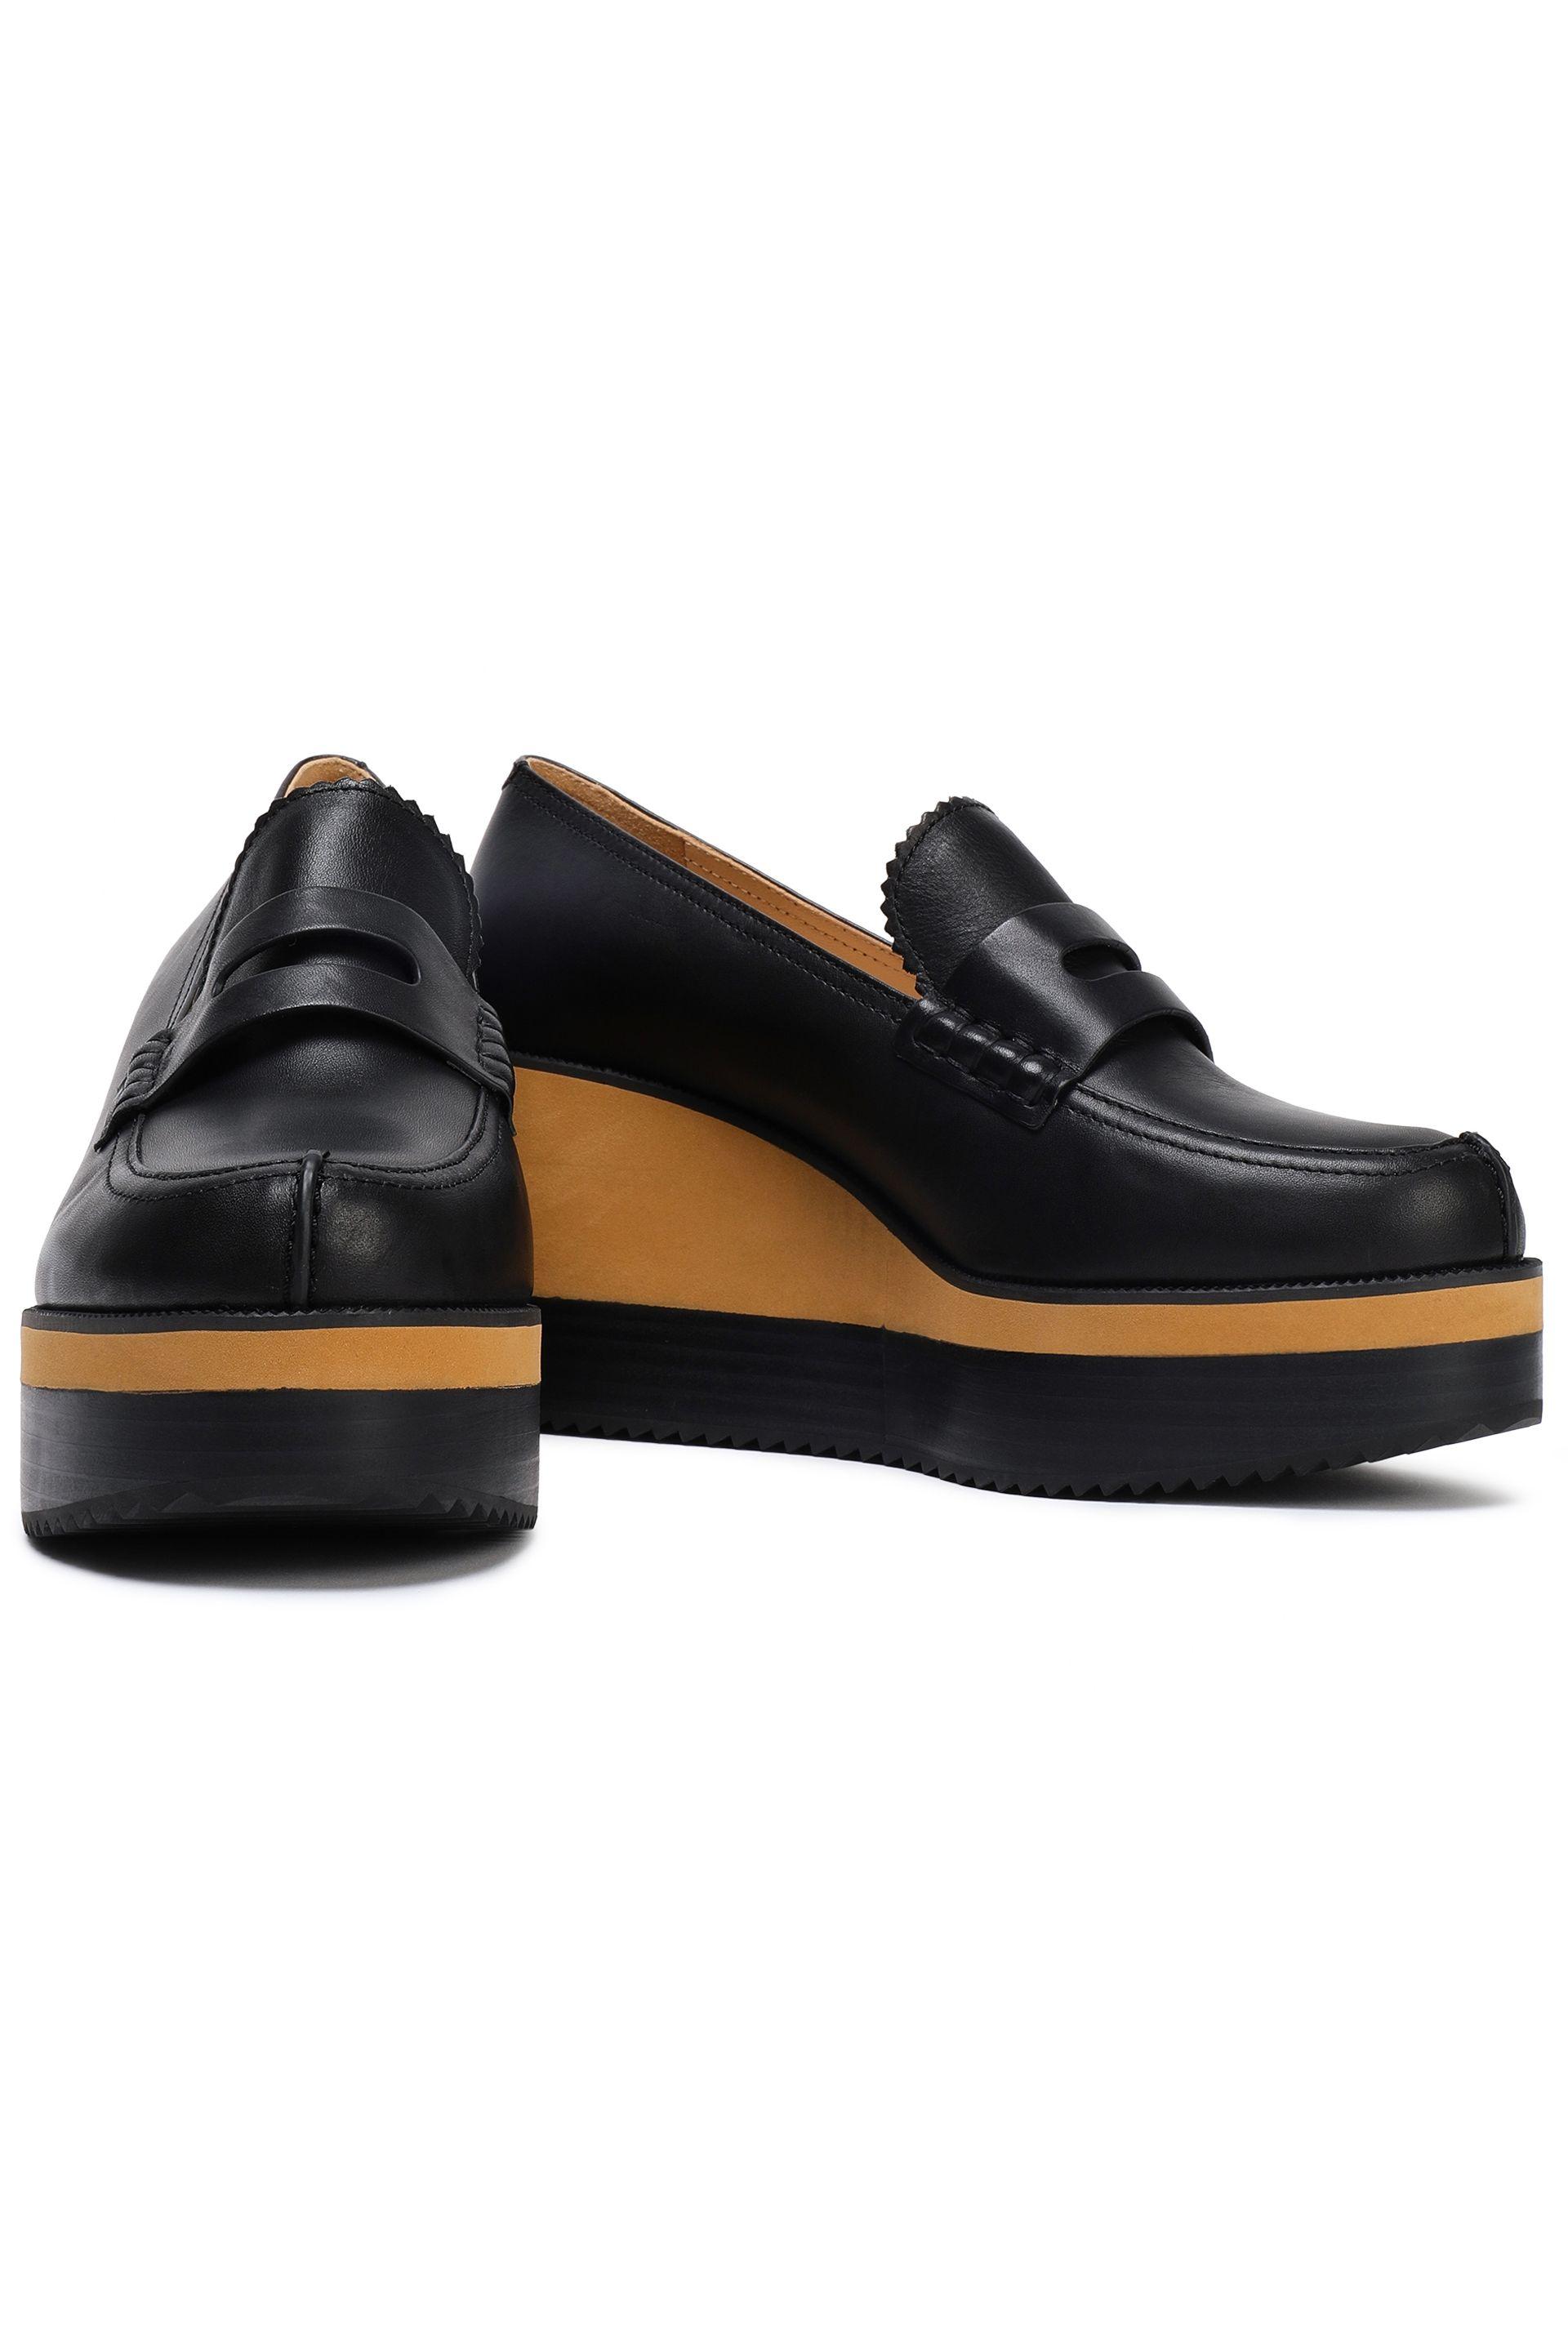 Jil Leather Wedge Loafers in Black - Lyst